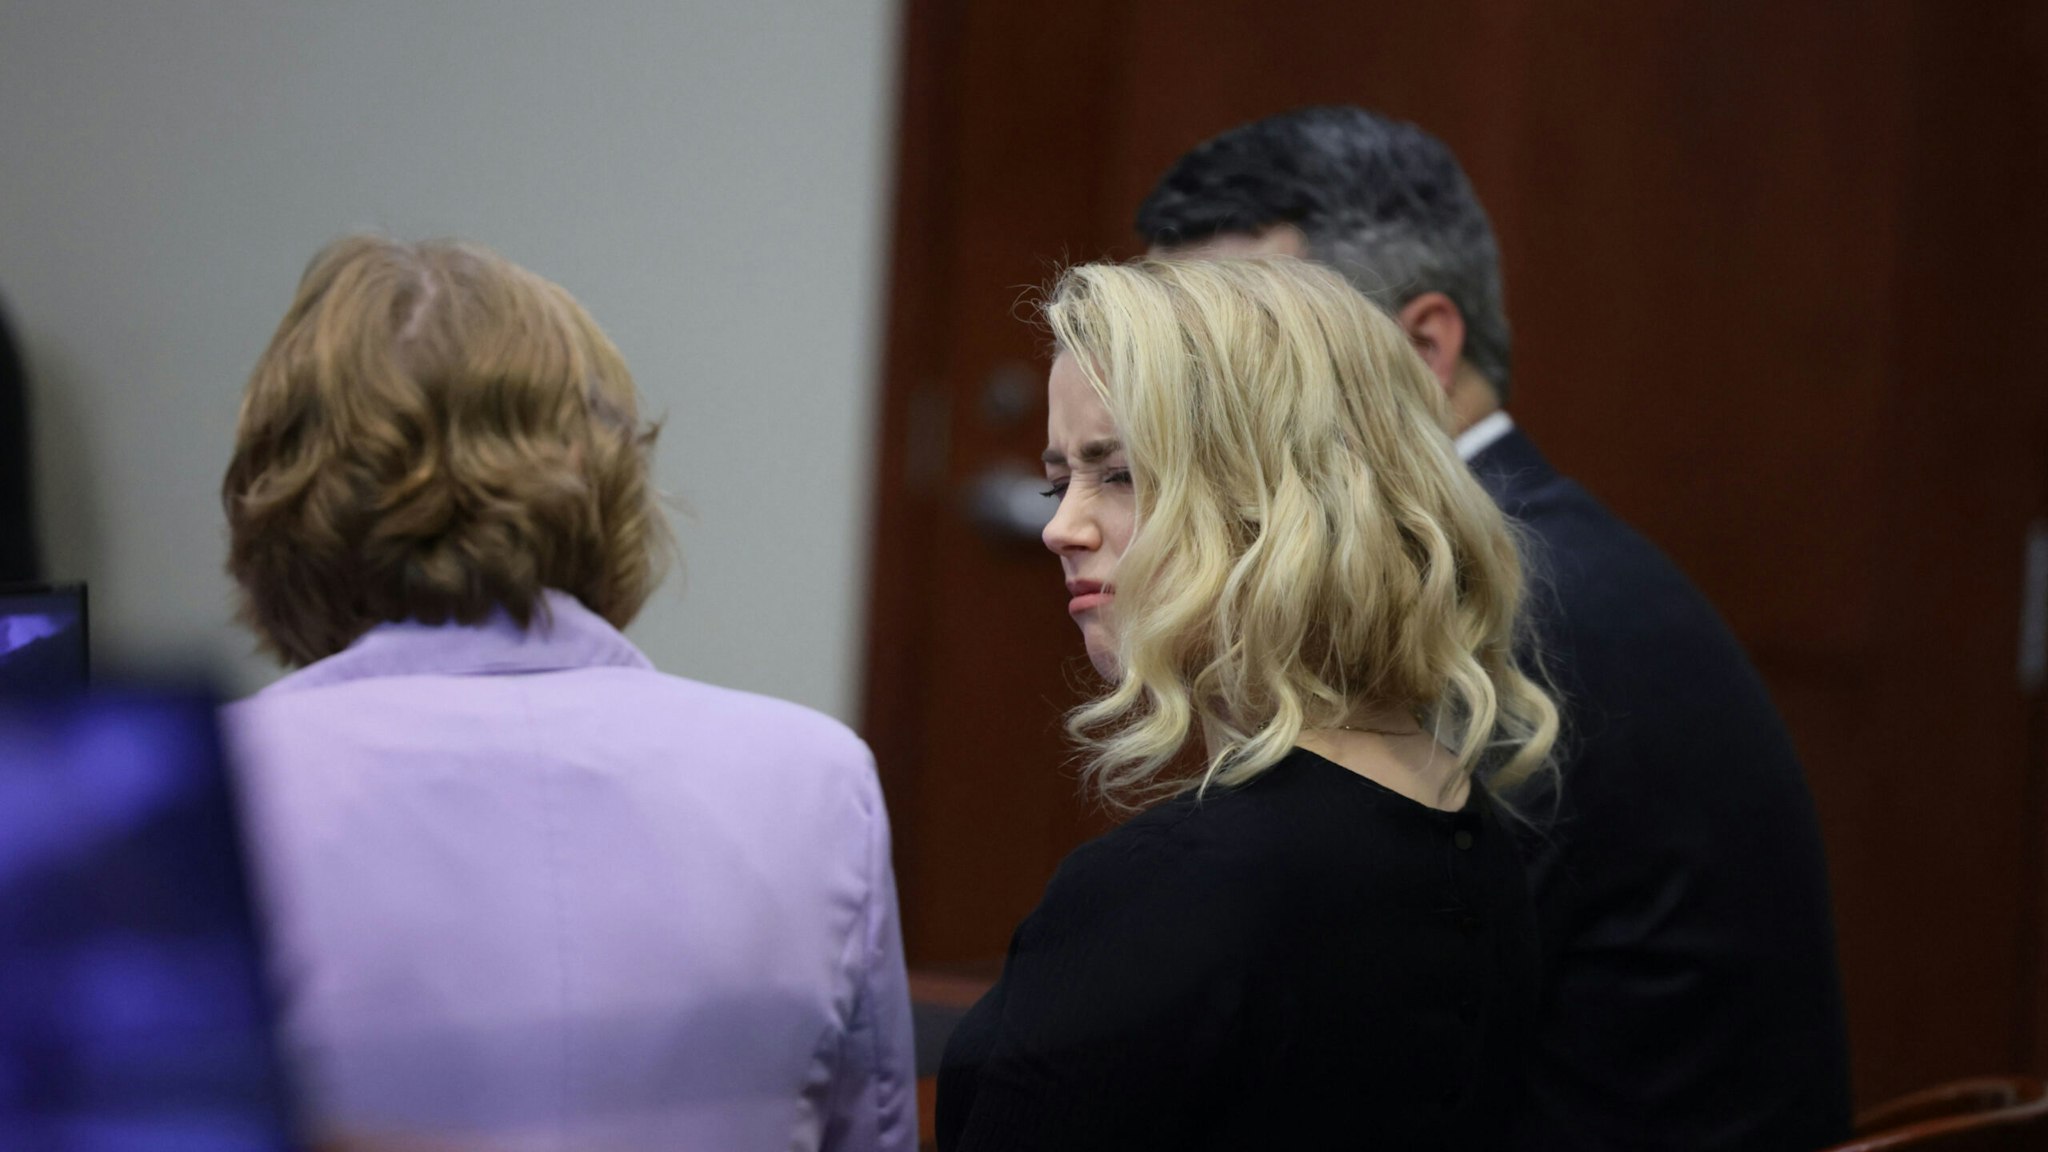 Actor Amber Heard looks at her lawyer before the jury said that they believe she defamed ex-husband Johnny Depp while announcing split verdicts in favor of both her ex-husband Johnny Depp and Heard on their claim and counter-claim in the Depp v. Heard civil defamation trial at the Fairfax County Circuit Courthouse in Fairfax, Virginia, on June 1, 2022.